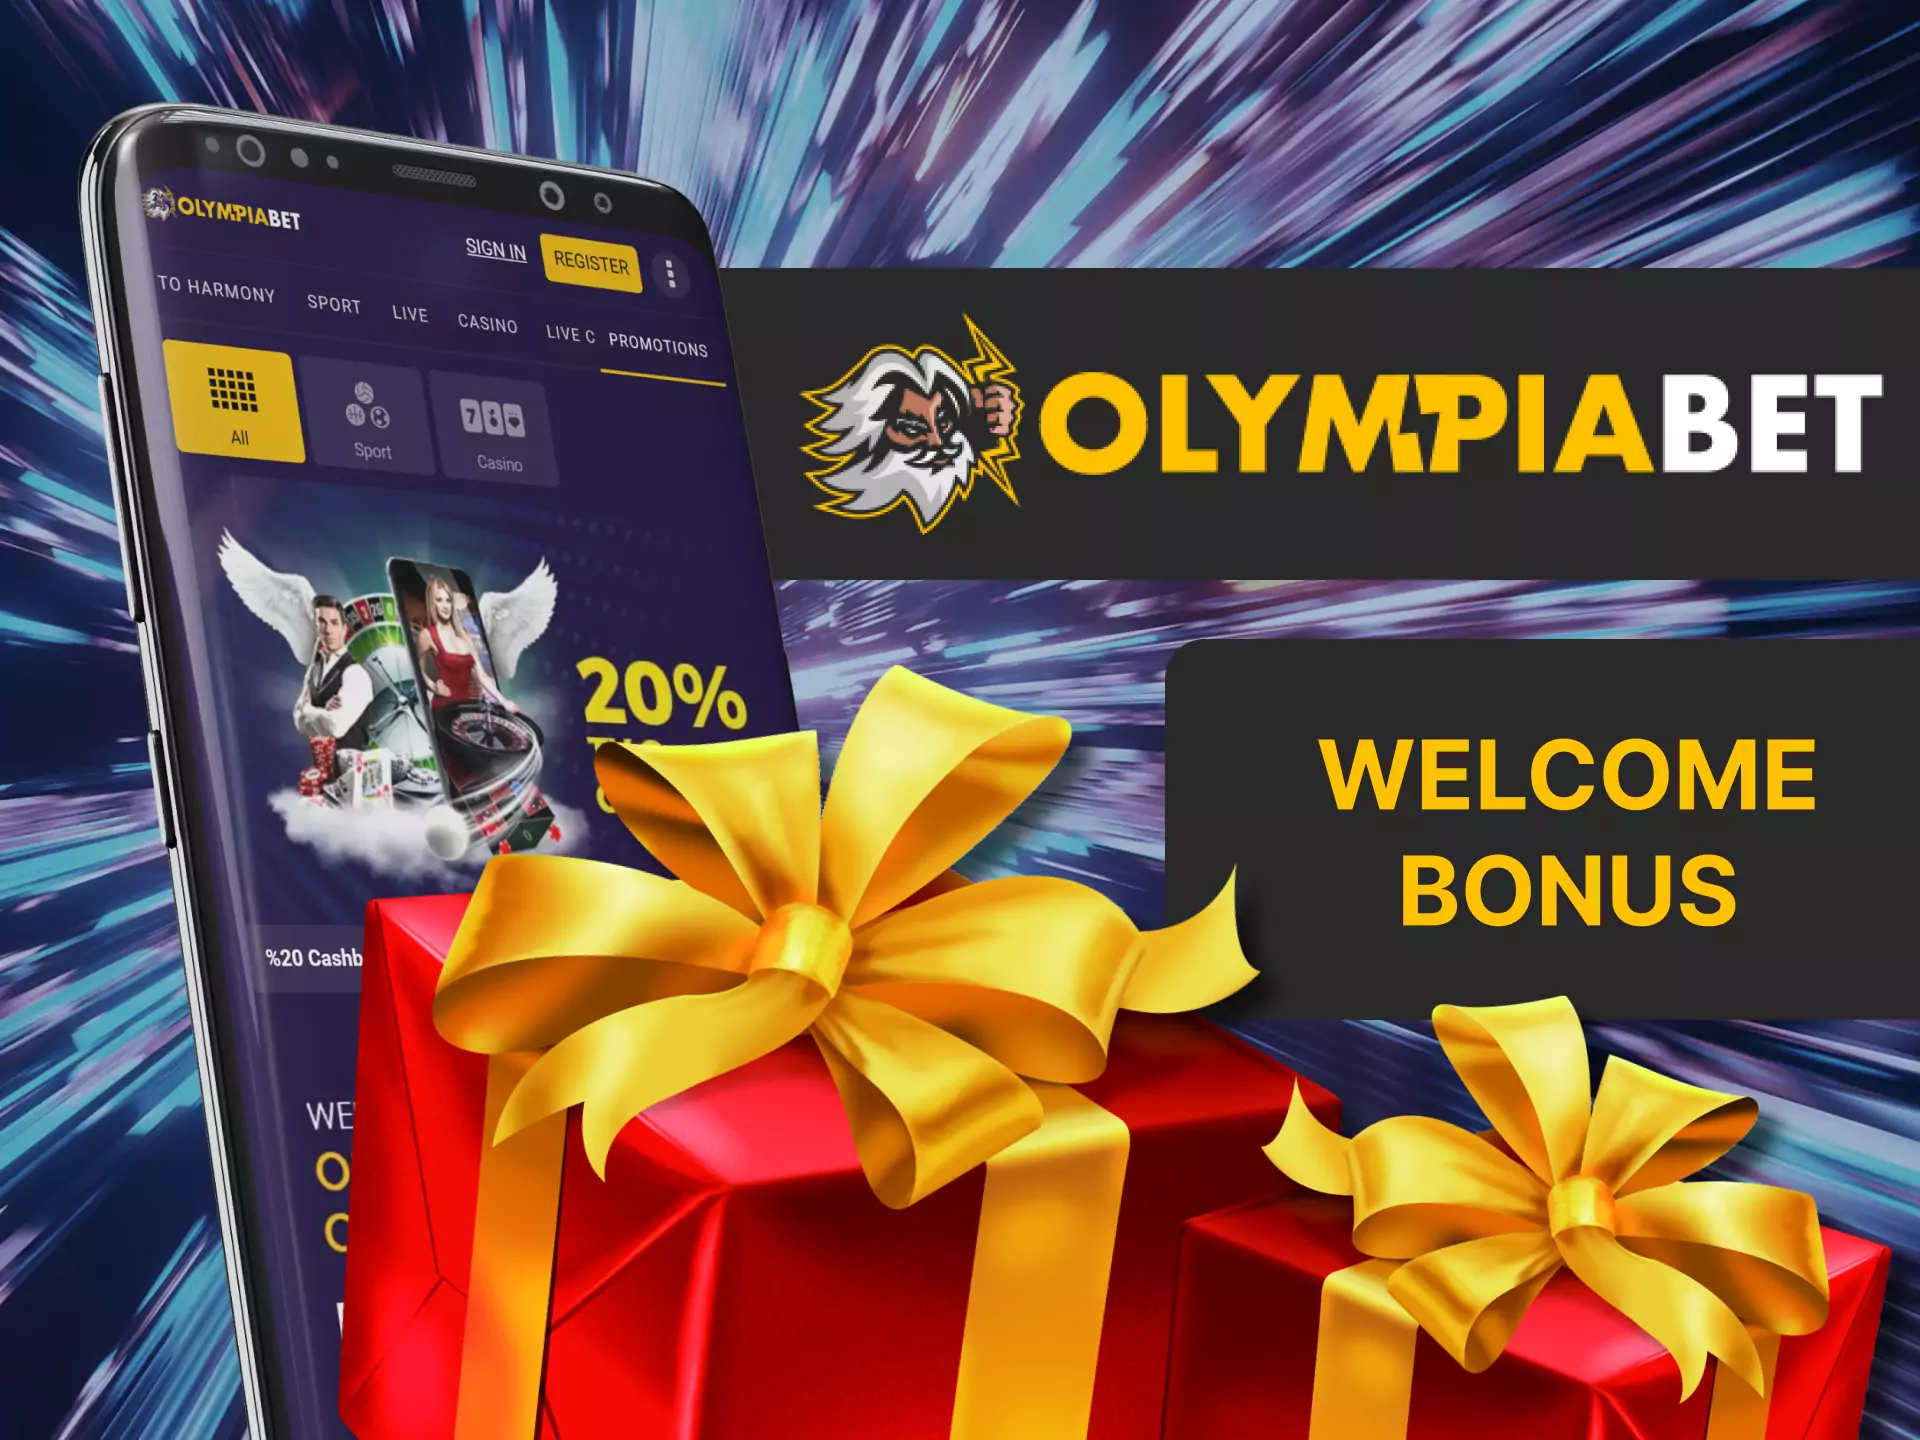 A special welcome bonus is waiting for you at Olympiabet.